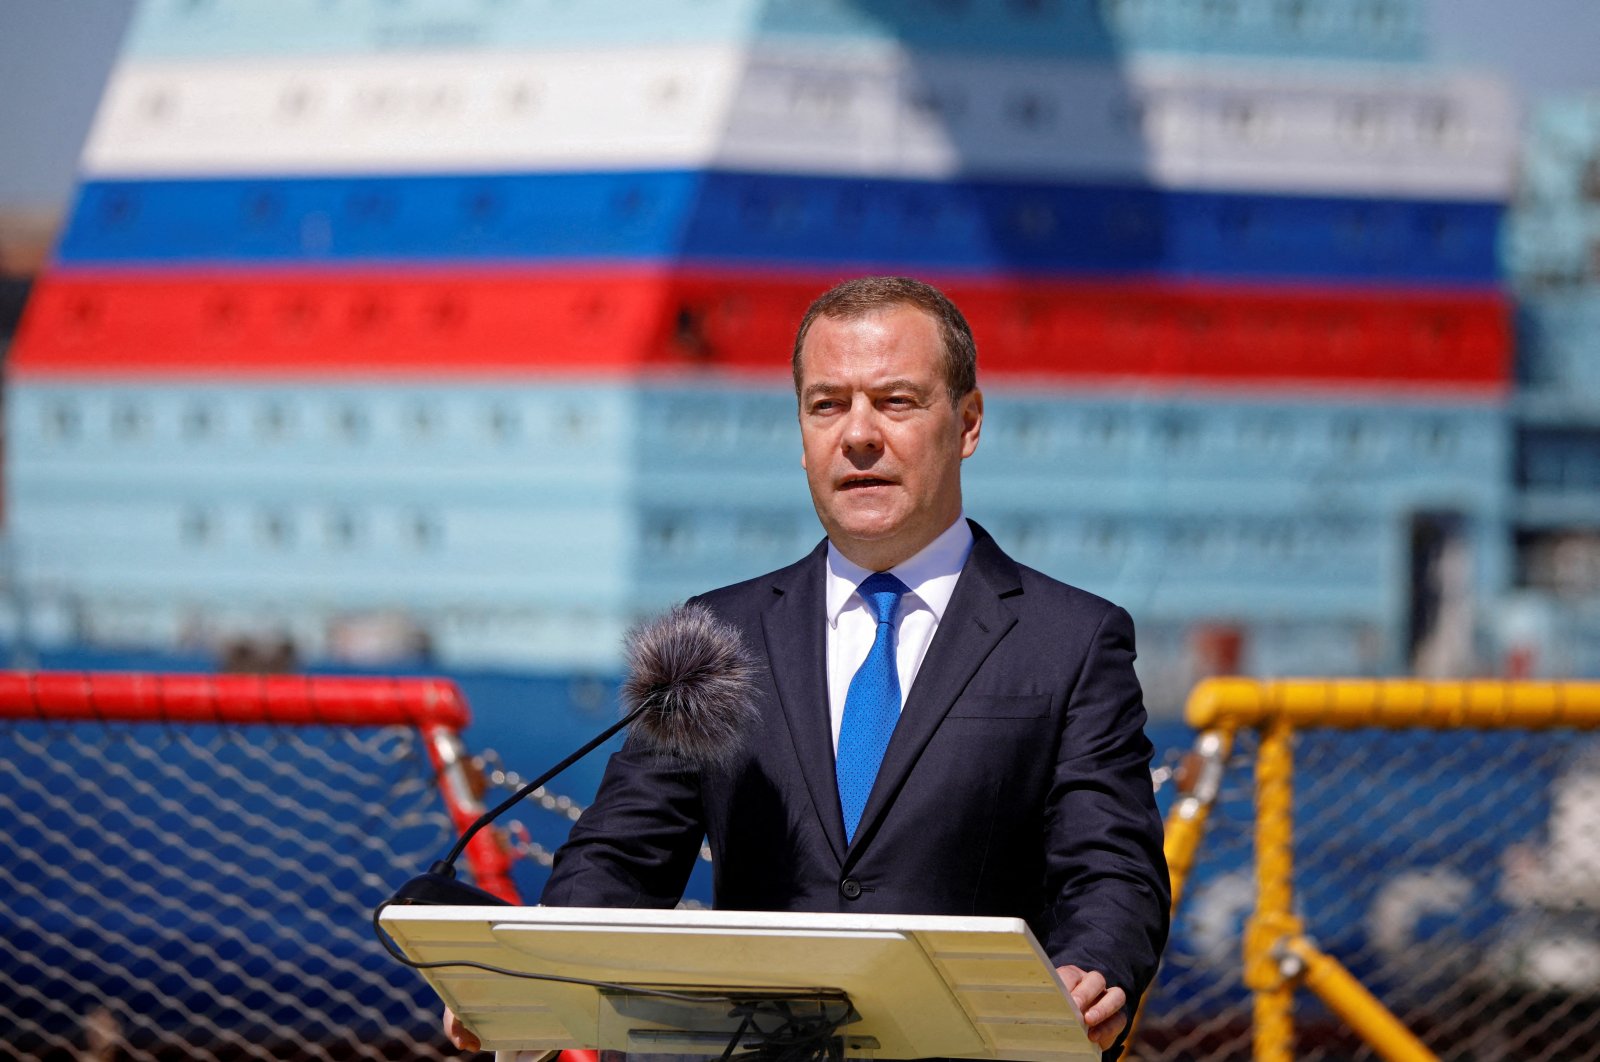 Dmitry Medvedev, deputy chairperson of Russia&#039;s Security Council, delivers a speech during a ceremony marking Shipbuilder&#039;s Day in Saint Petersburg, Russia, June 29, 2022. (Reuters Photo)